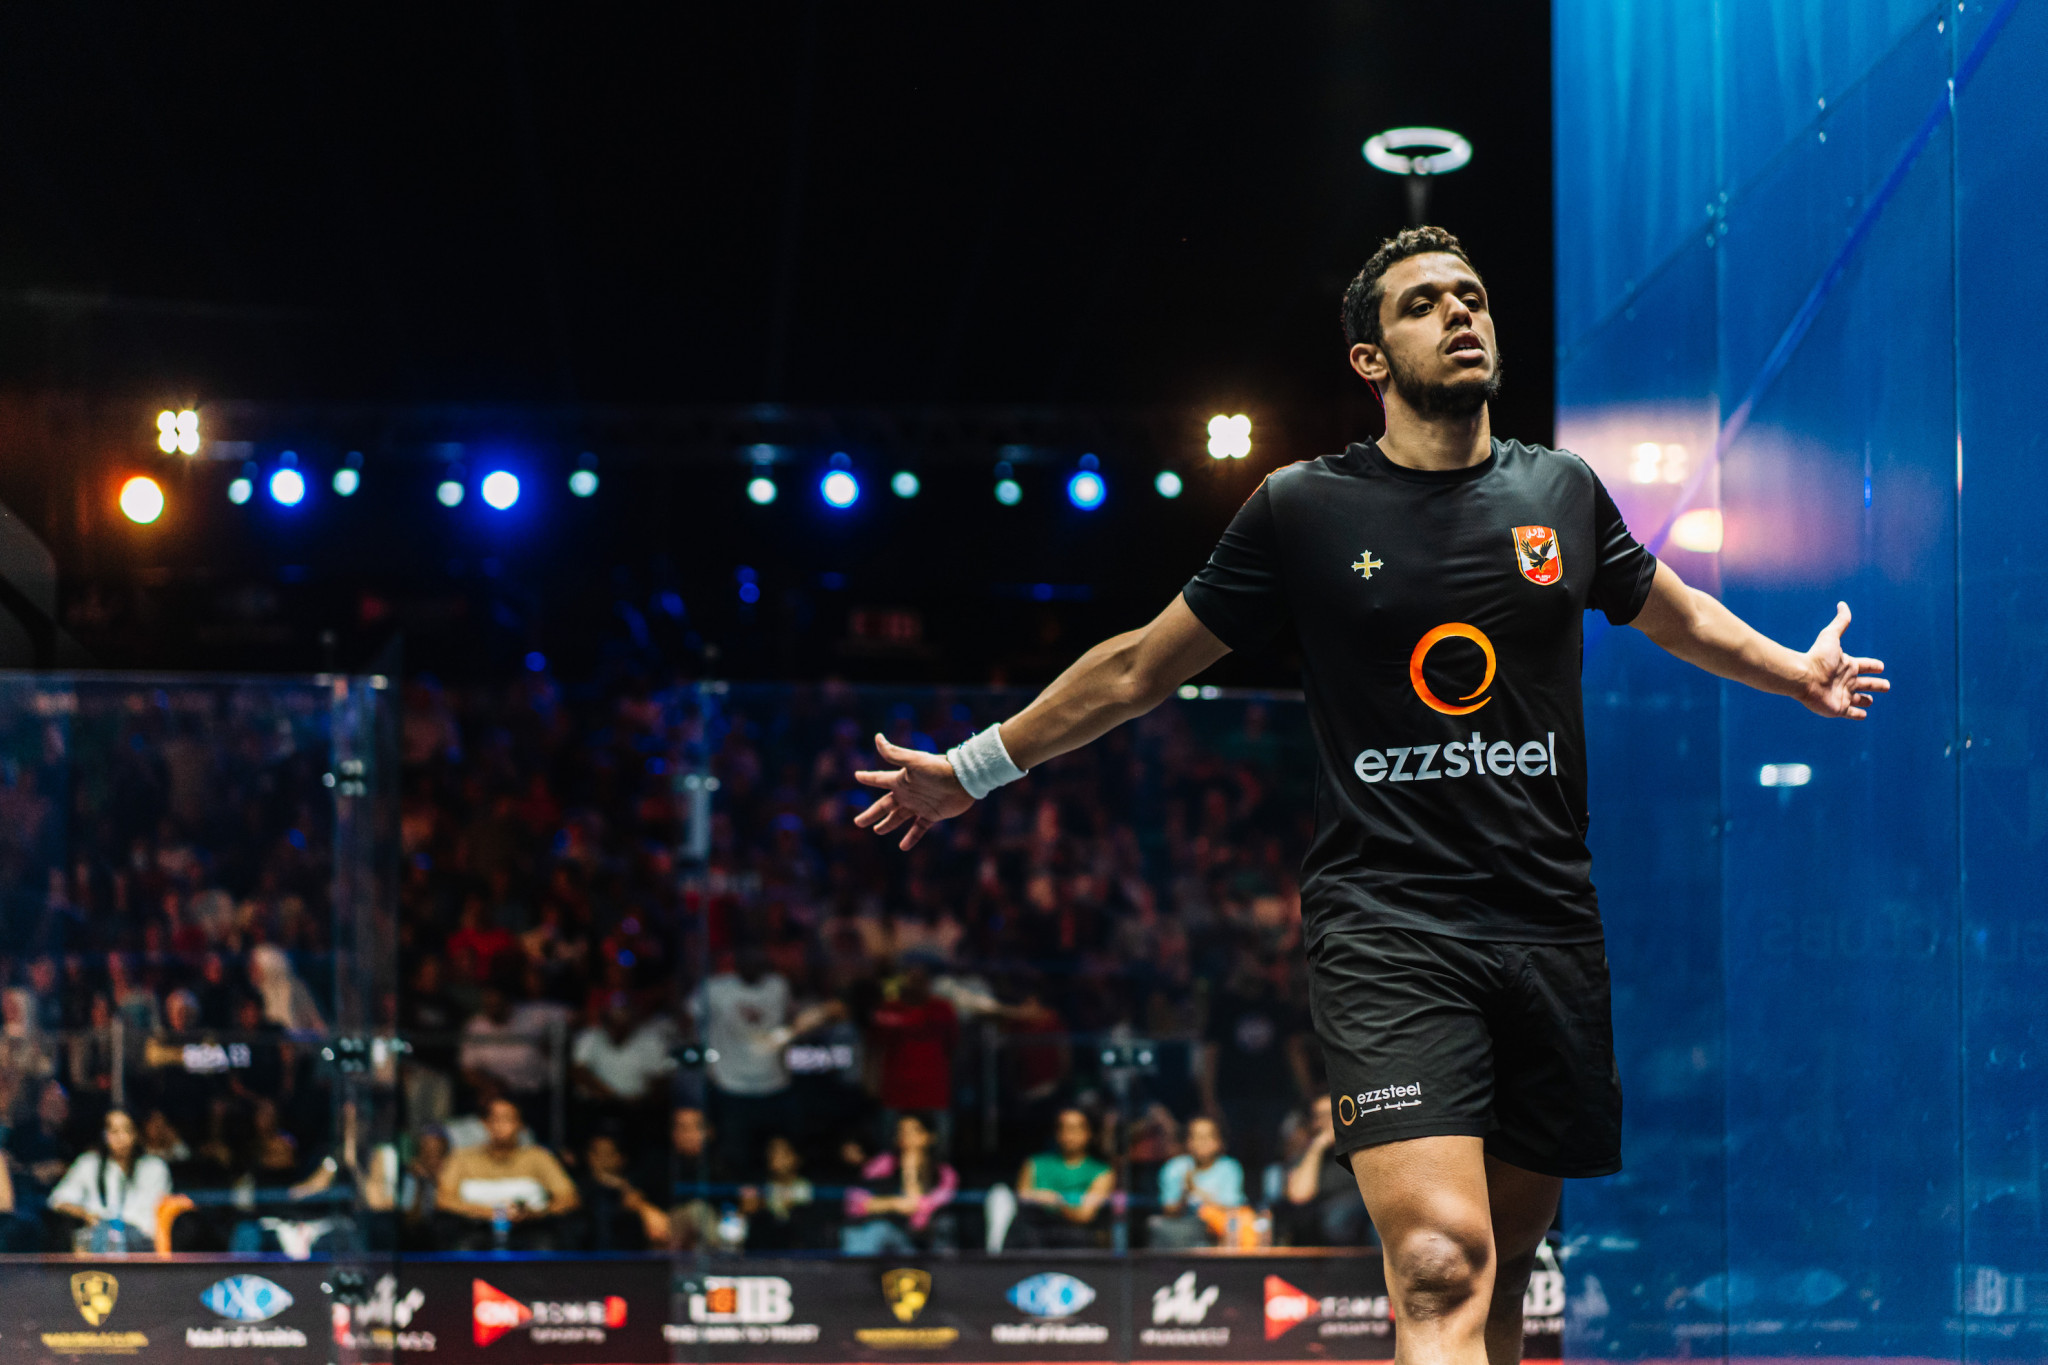 Men's fourth seed Mostafa Asal caused an upset in the semi-finals of the PSA World Tour Finals, defeating Ali Farag ©PSA World Tour